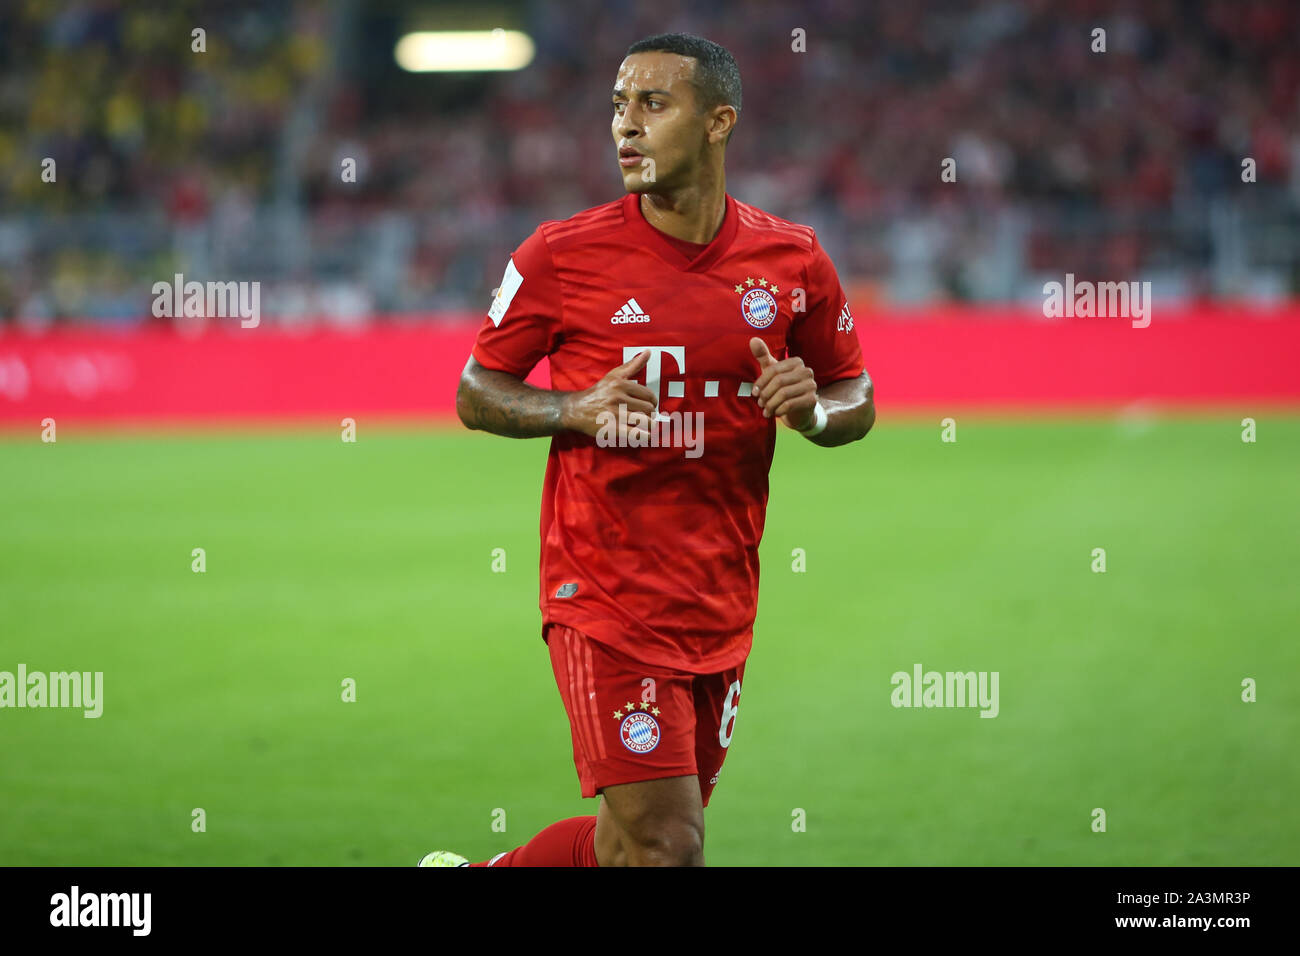 DORTMUND, GERMANY - AUGUST 03, 2019: Thiago (Bayern Munchen) pictured during the final of the 2019/20 german supercup. Stock Photo